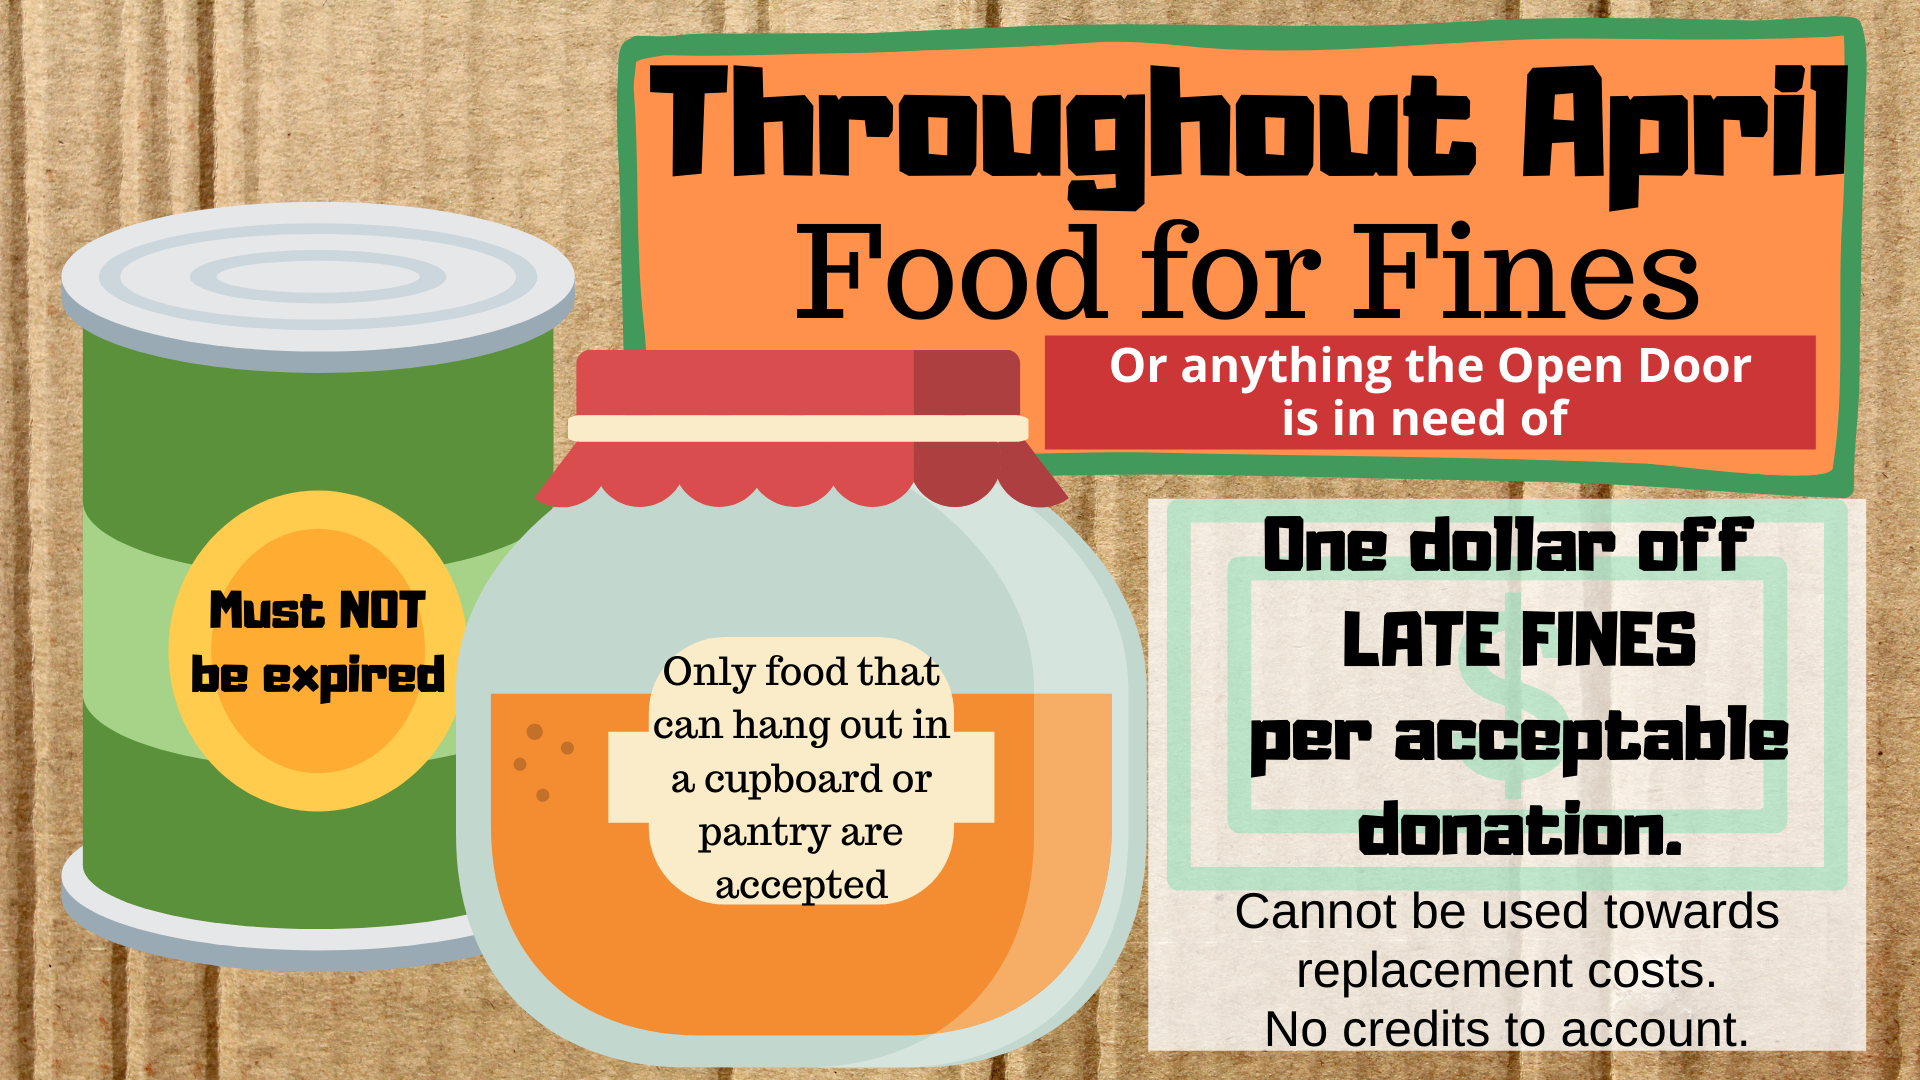 Food for fines throughout April